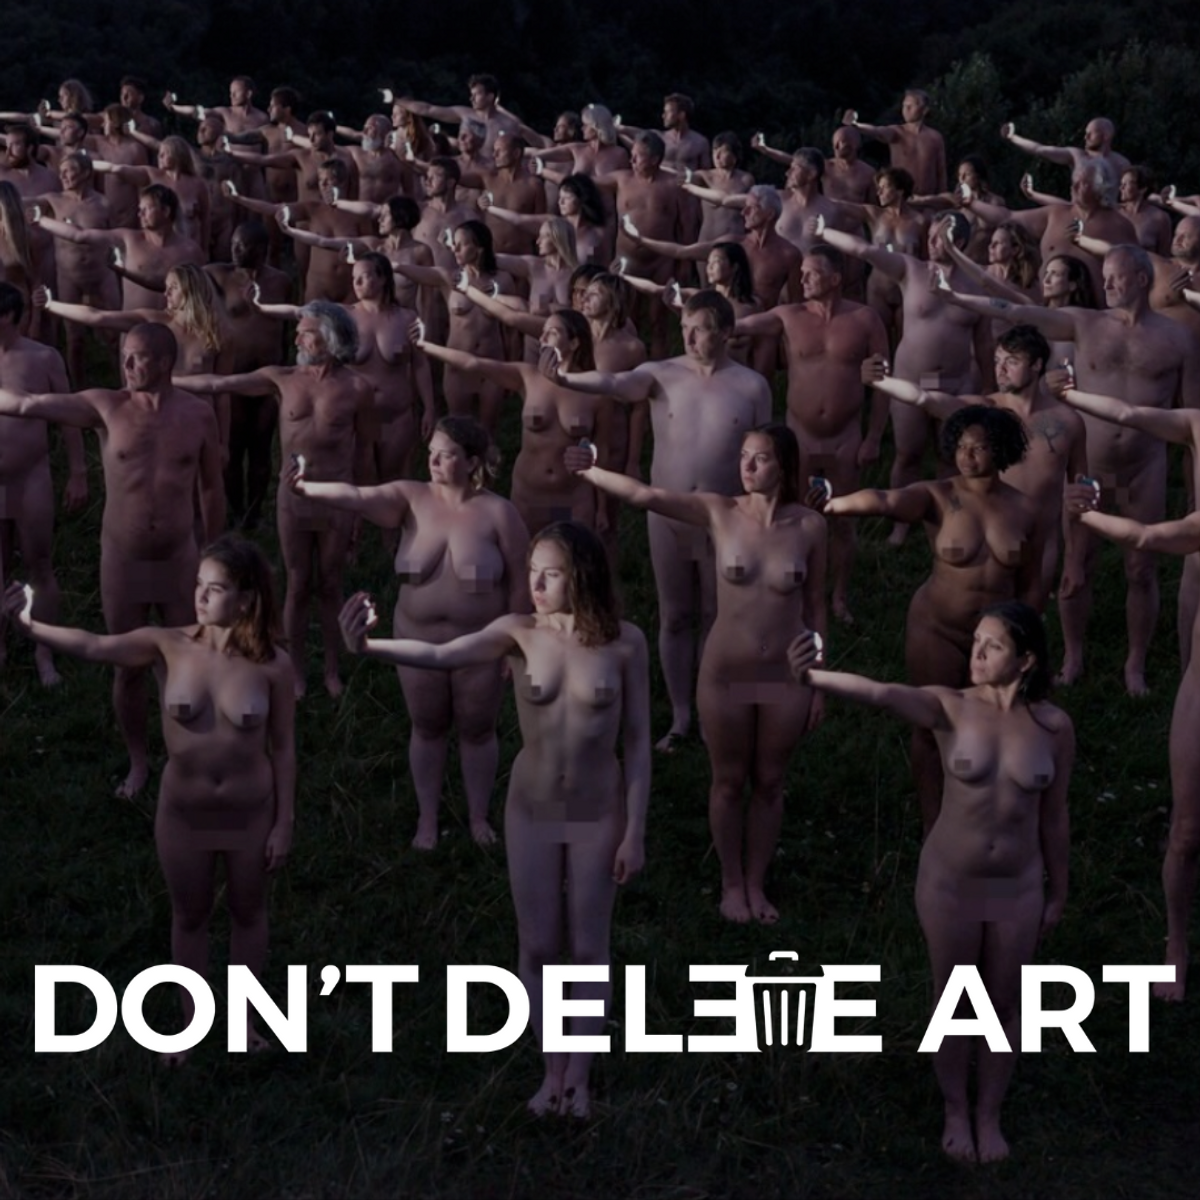 The Don't Delete Art logo, set over an image by the artist Spencer Tunick Courtesy of Don't Delete Art and Spencer Tunick